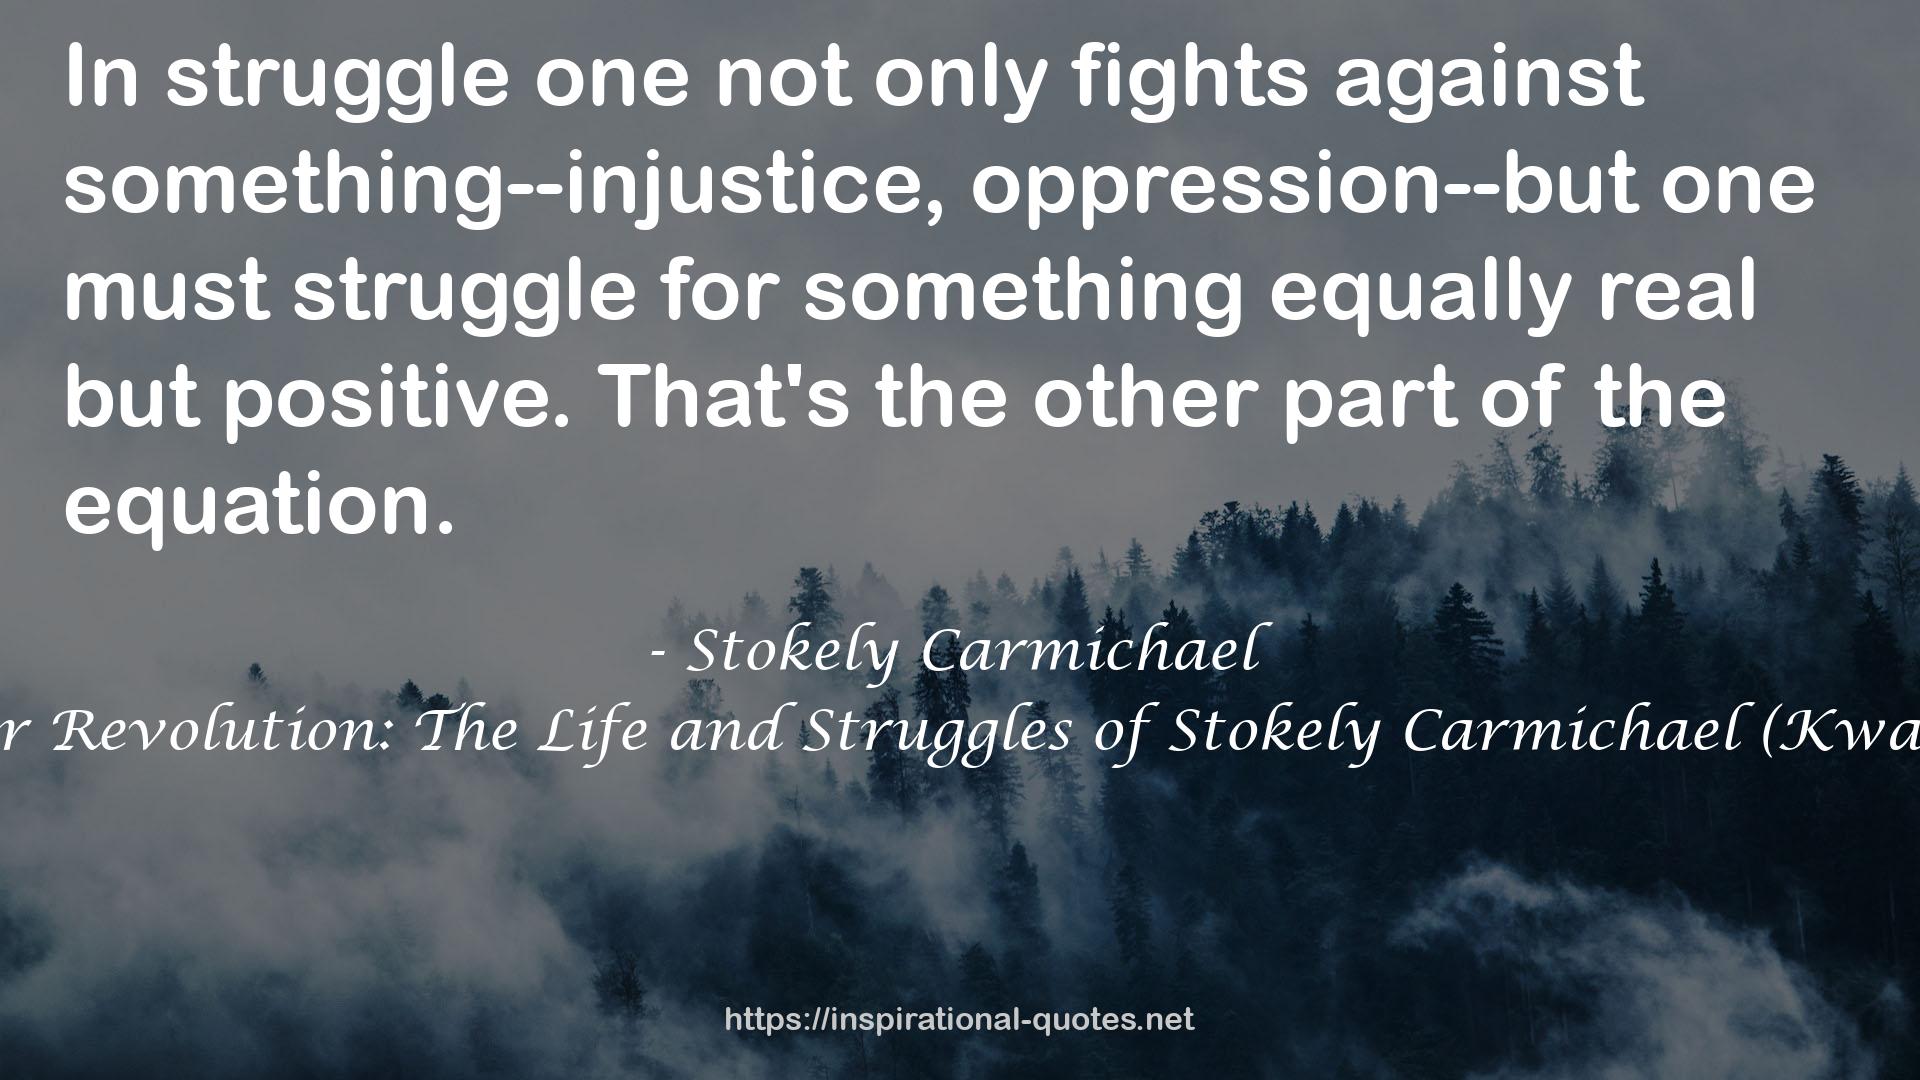 Ready for Revolution: The Life and Struggles of Stokely Carmichael (Kwame Ture) QUOTES